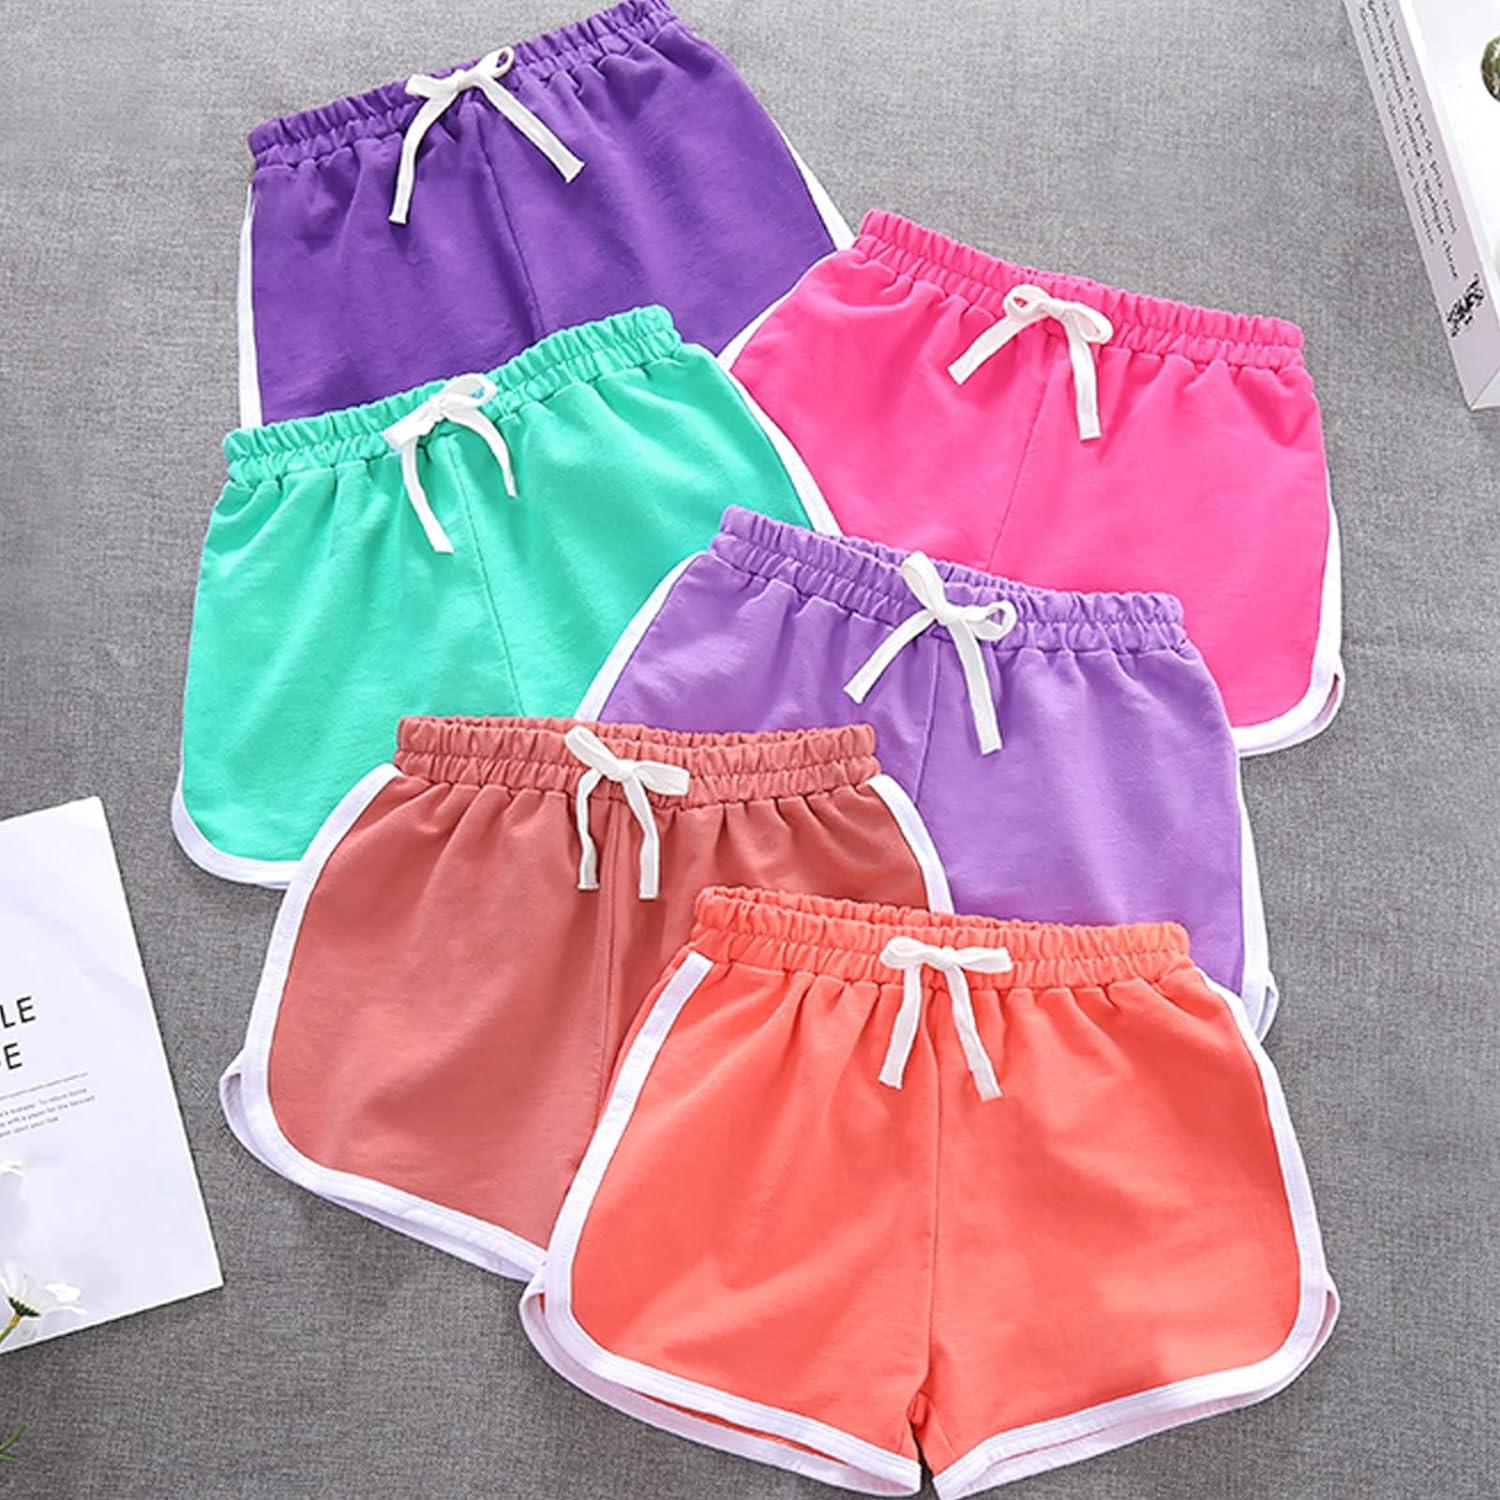  3 Pack Little Big Girls Running Athletic Cotton Shorts